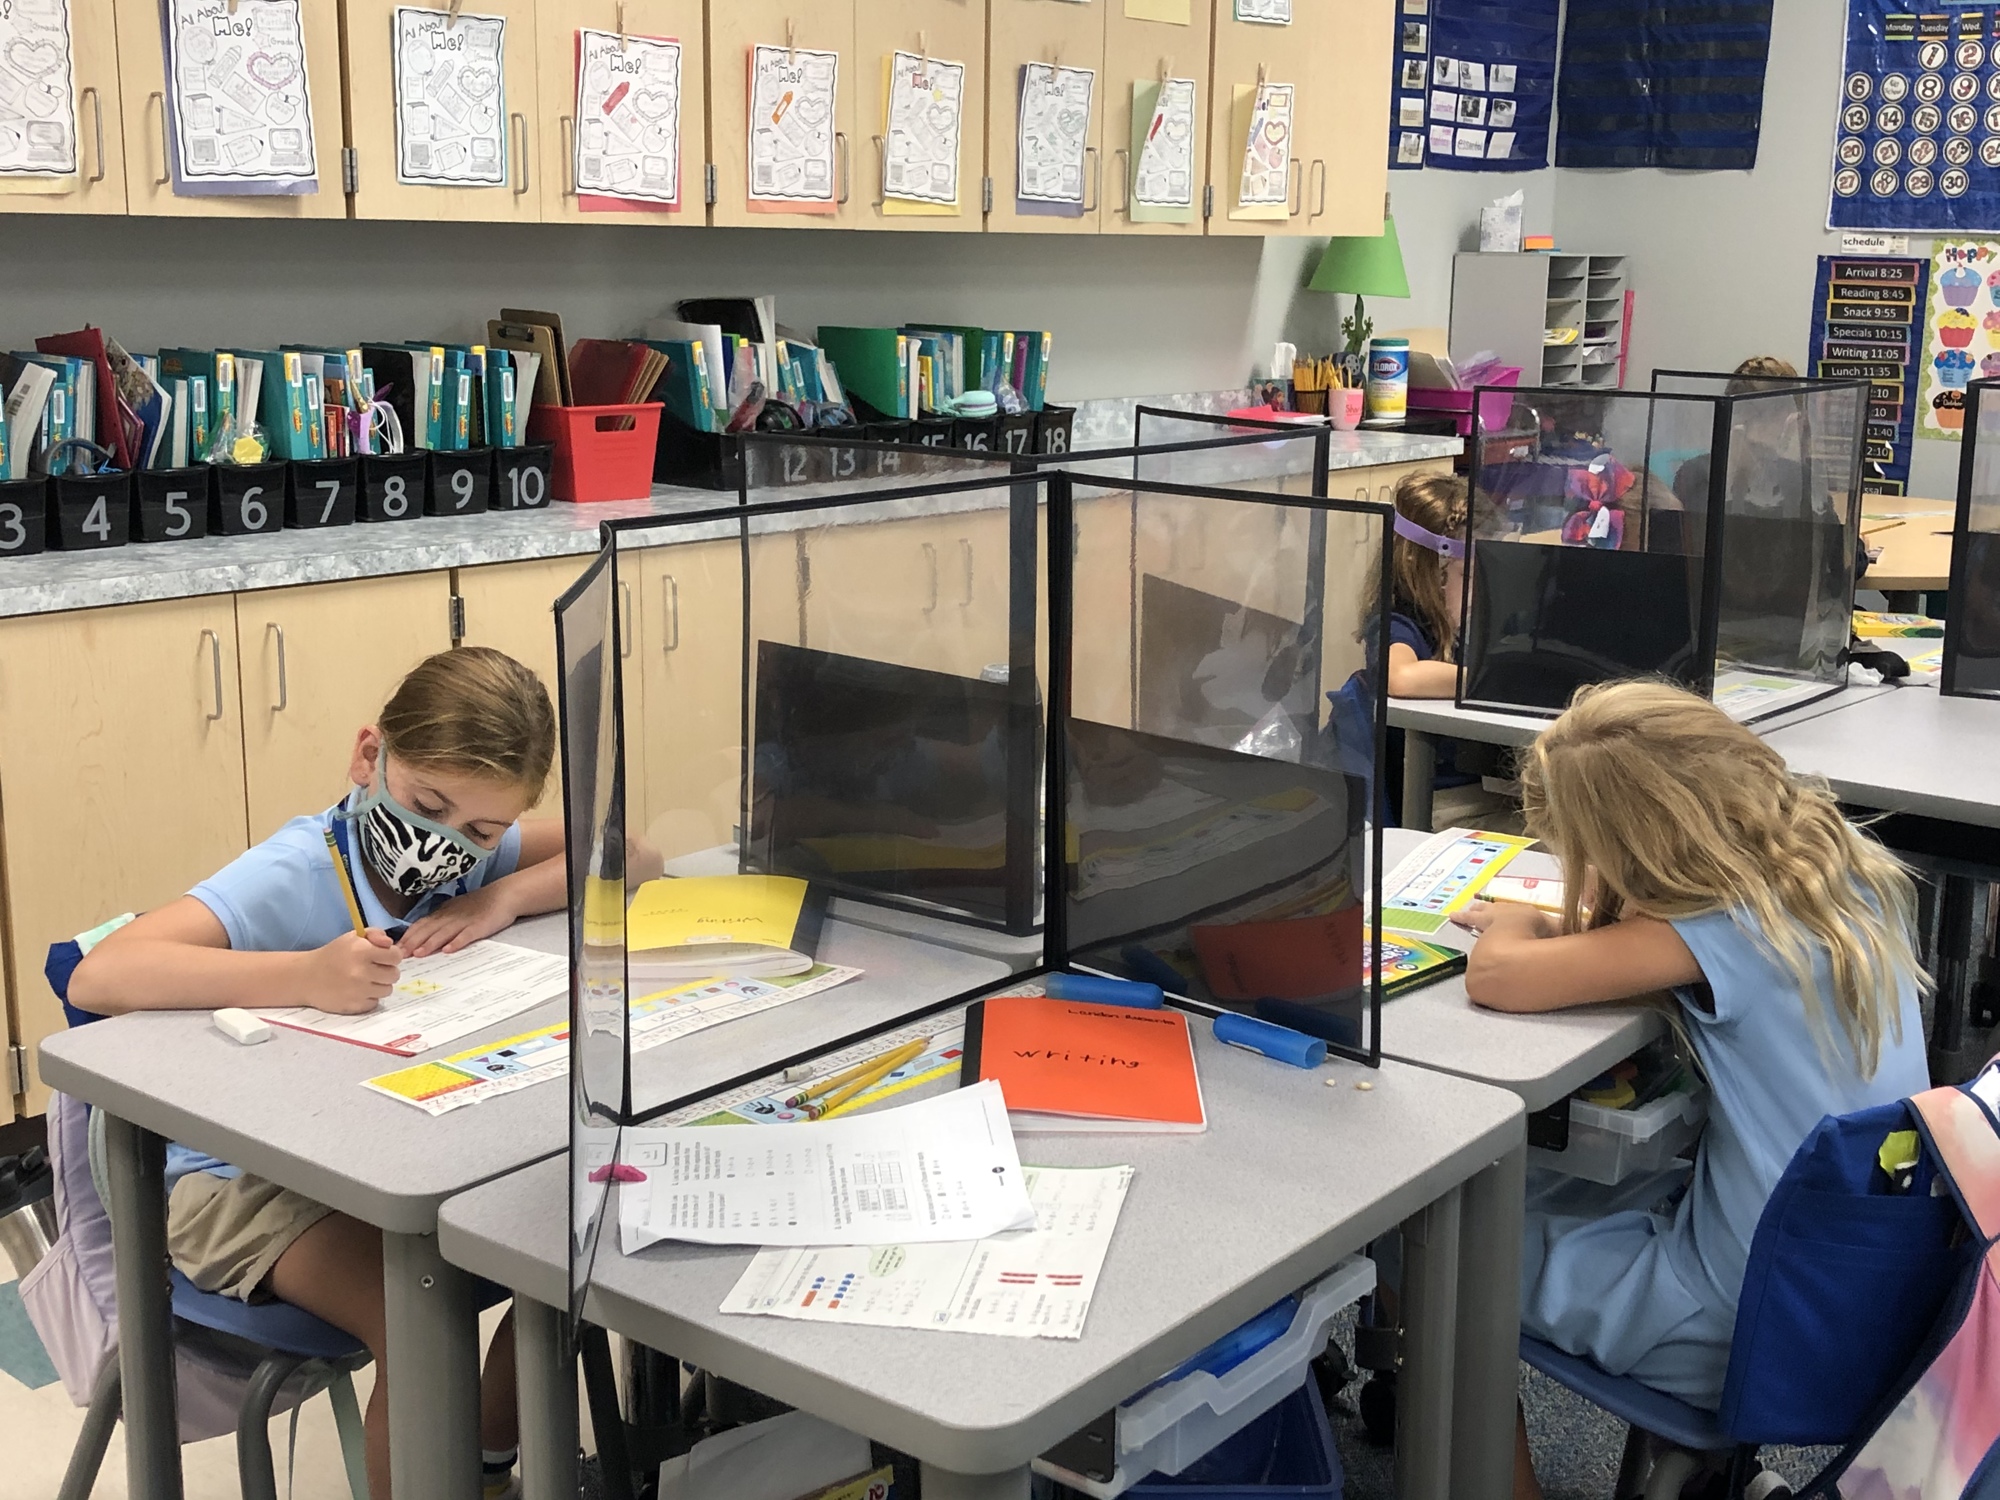 Second graders Aubri Darpino and Ella Baas are socially distant while working on assignments. The desks have casters, which allow teachers to easily move them so students can collaborate while also being safe.